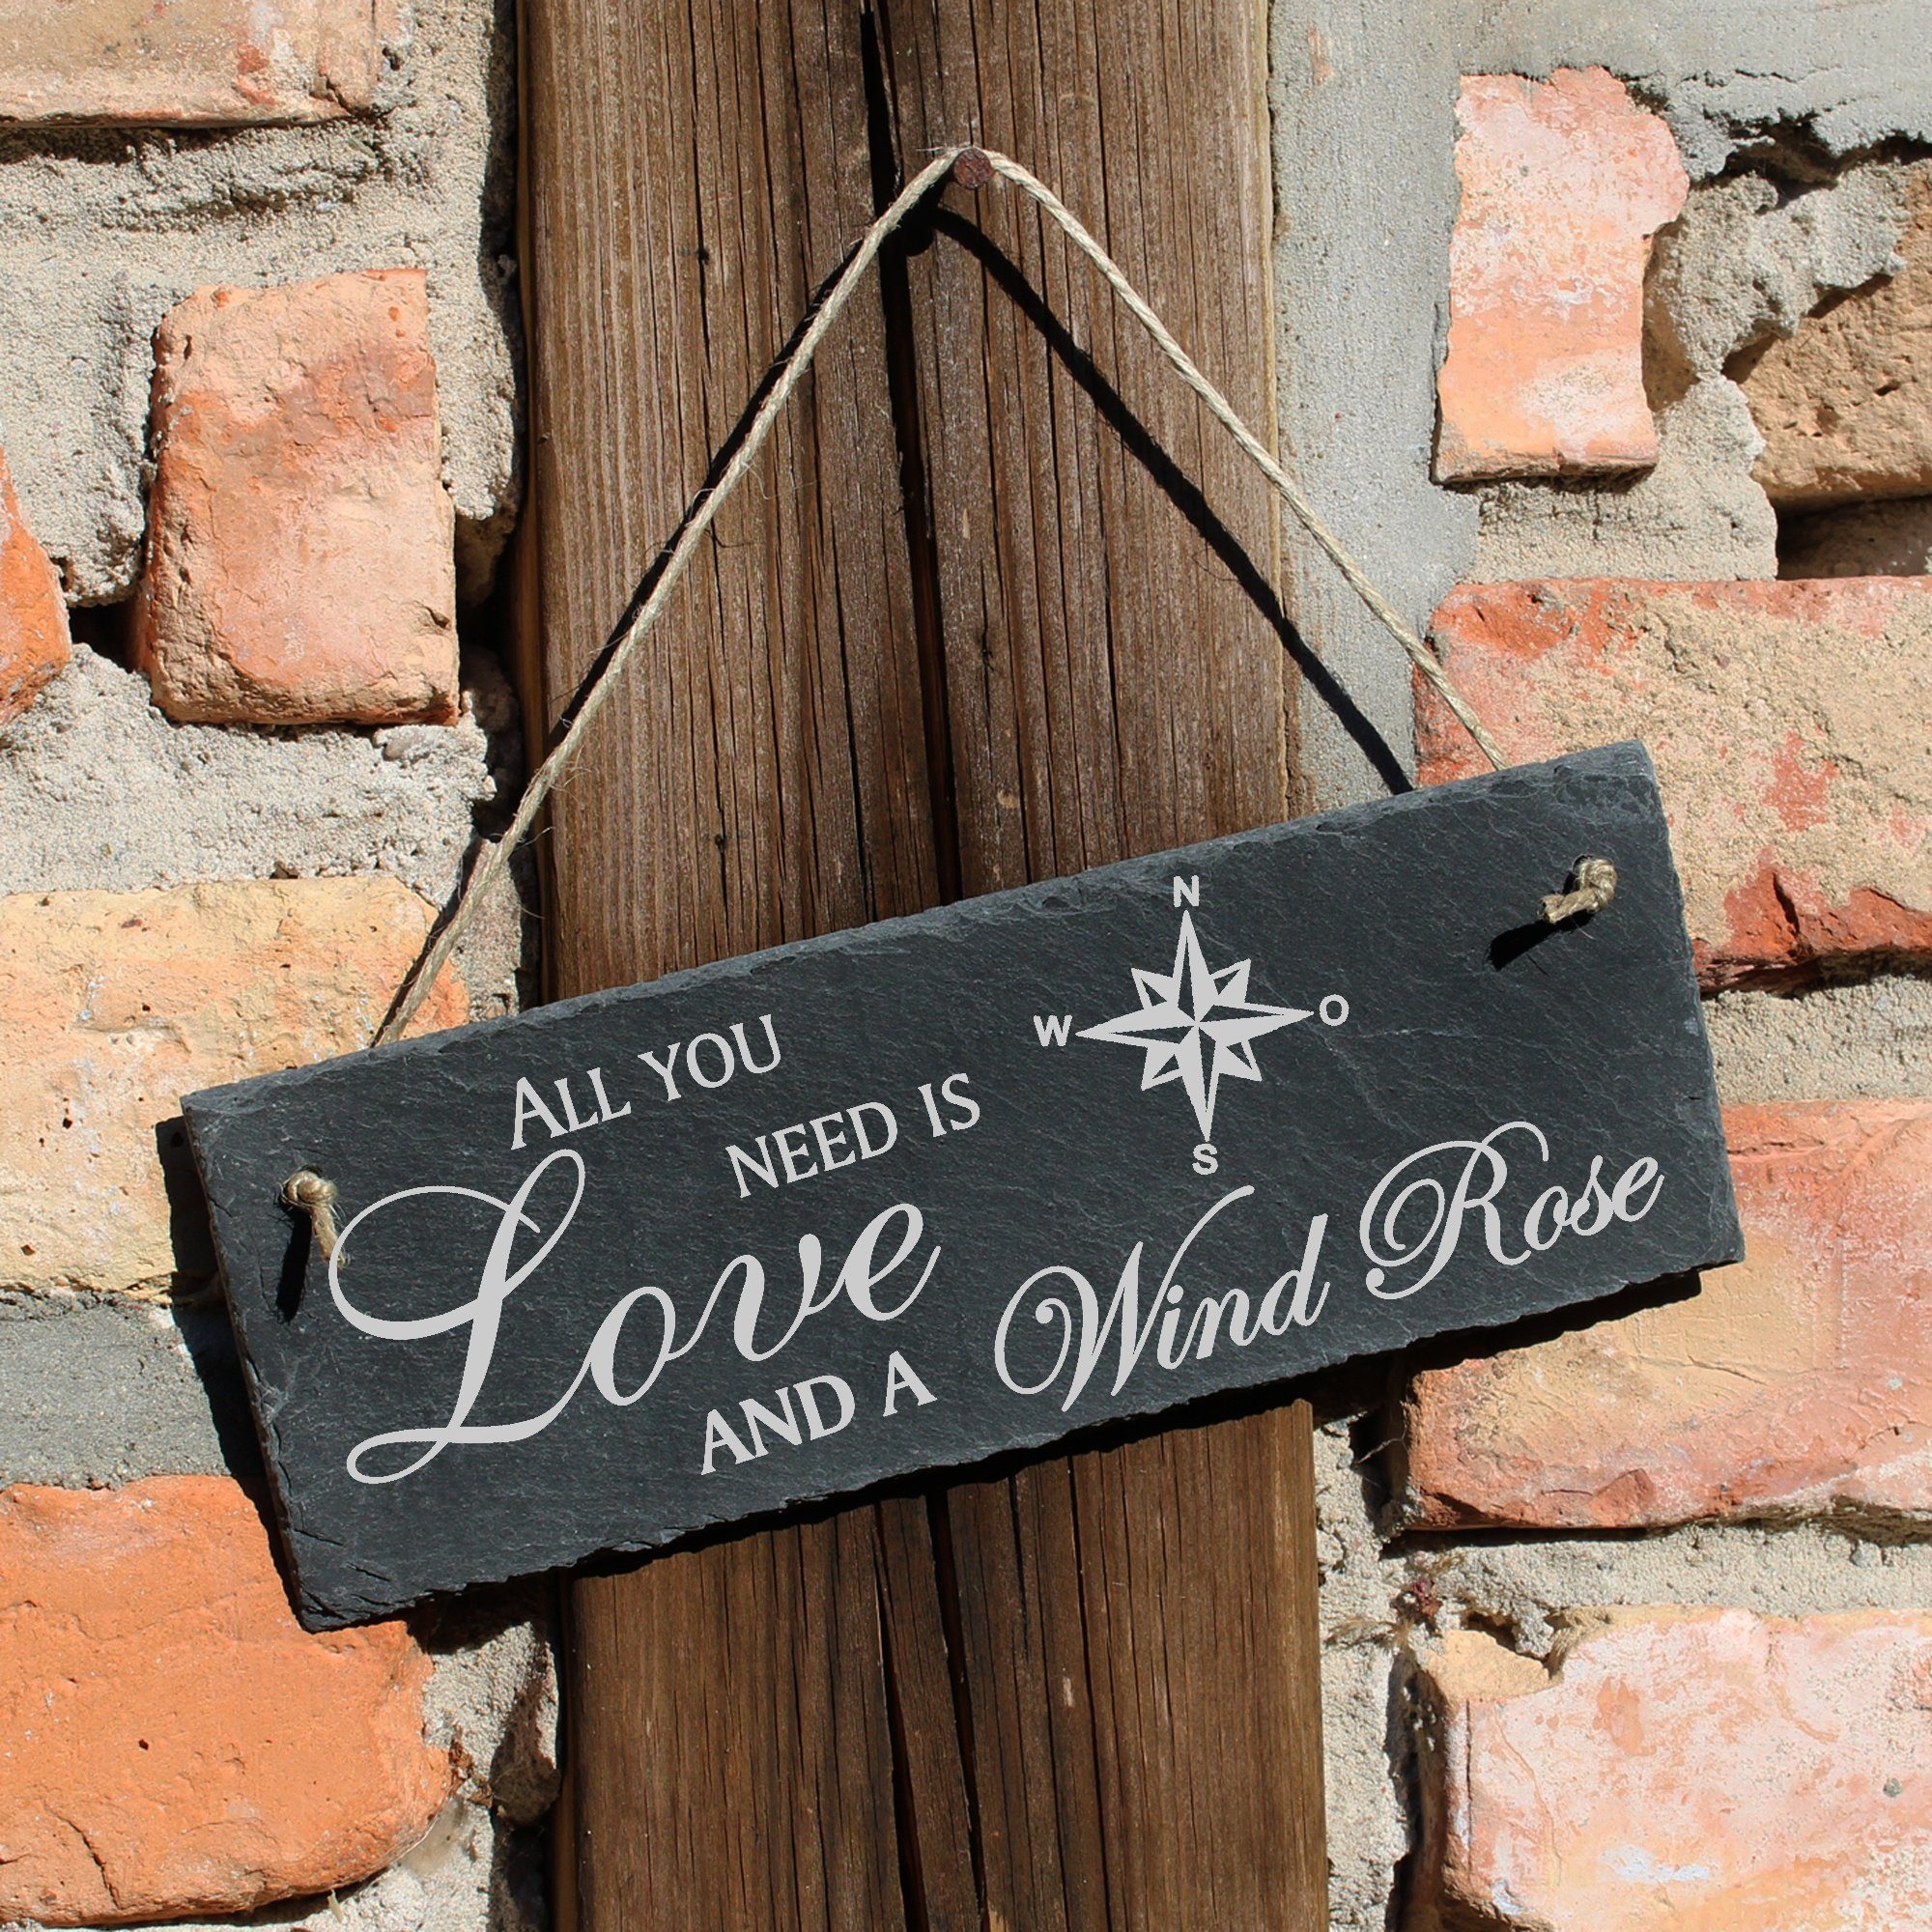 Dekolando Hängedekoration is Wind Love Windrose 22x8cm a you need All Rose and